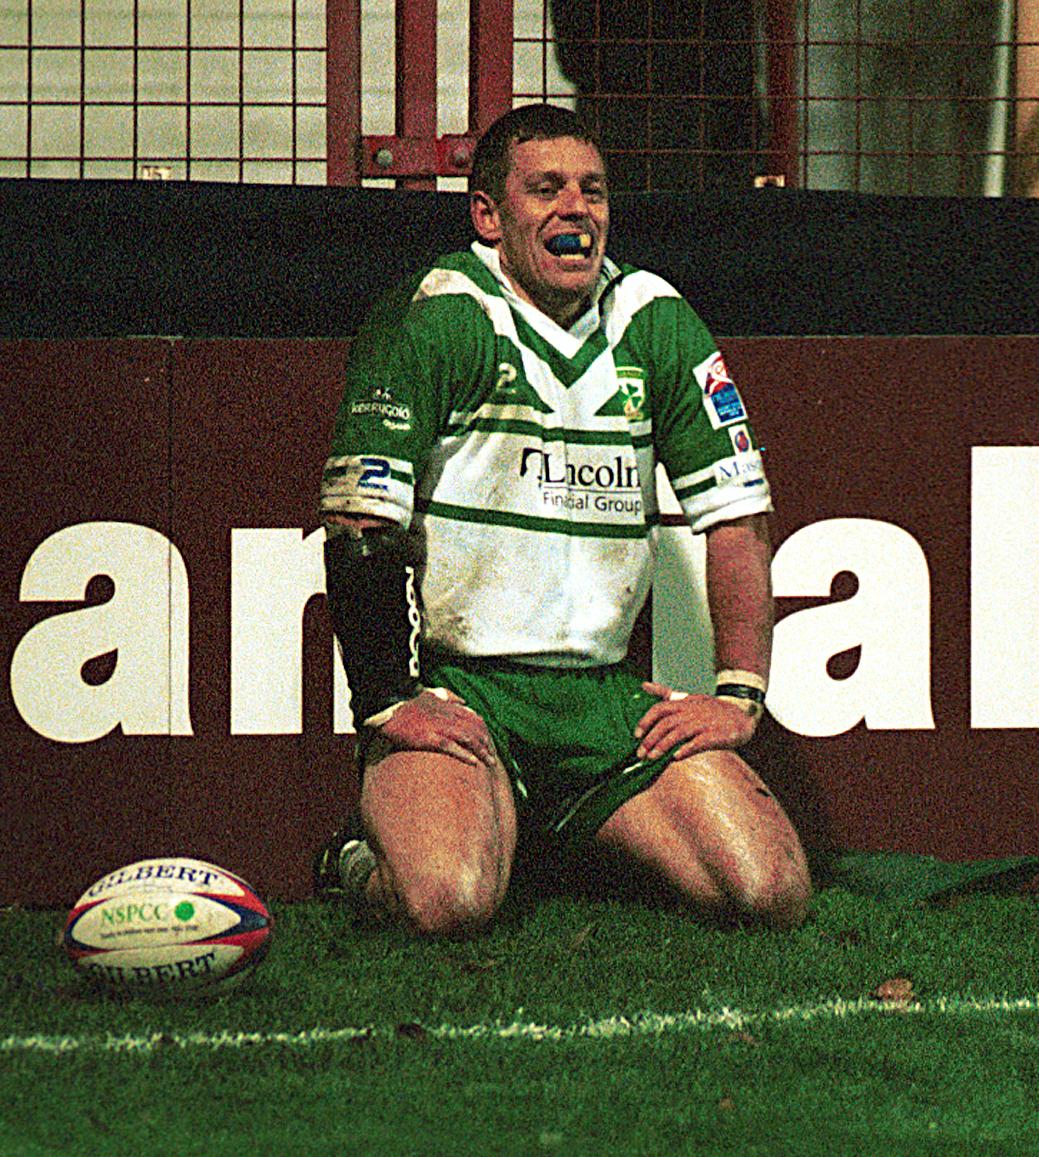 Mark Forster representing Ireland in the 2000 World Cup against New Zealand Maories in Dublin